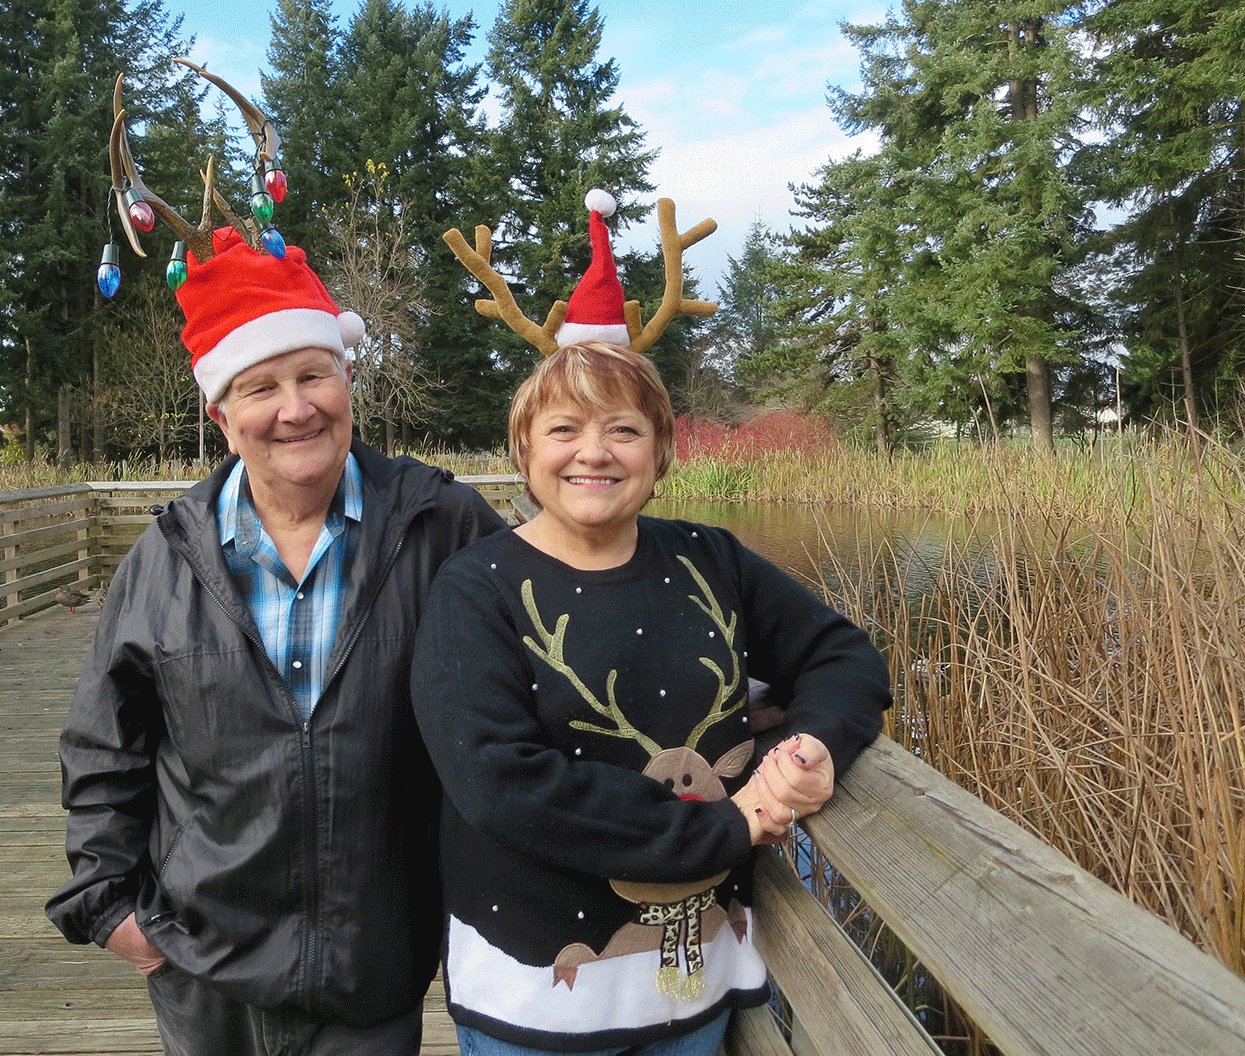 Donning their favorite holiday hats in their favorite Yelm park, Jim and Peggi Reese say they are excited to lead Yelm’s annual Christmas in the Park Parade as this year’s grand marshals. They were selected by the Parks Committee because of their lifelong commitment to volunteering in the community. Jim’s hat was purchased at Jayhawk’s years ago, and he refuses multiple offers from people to buy it every time he wears it, Peggi said.